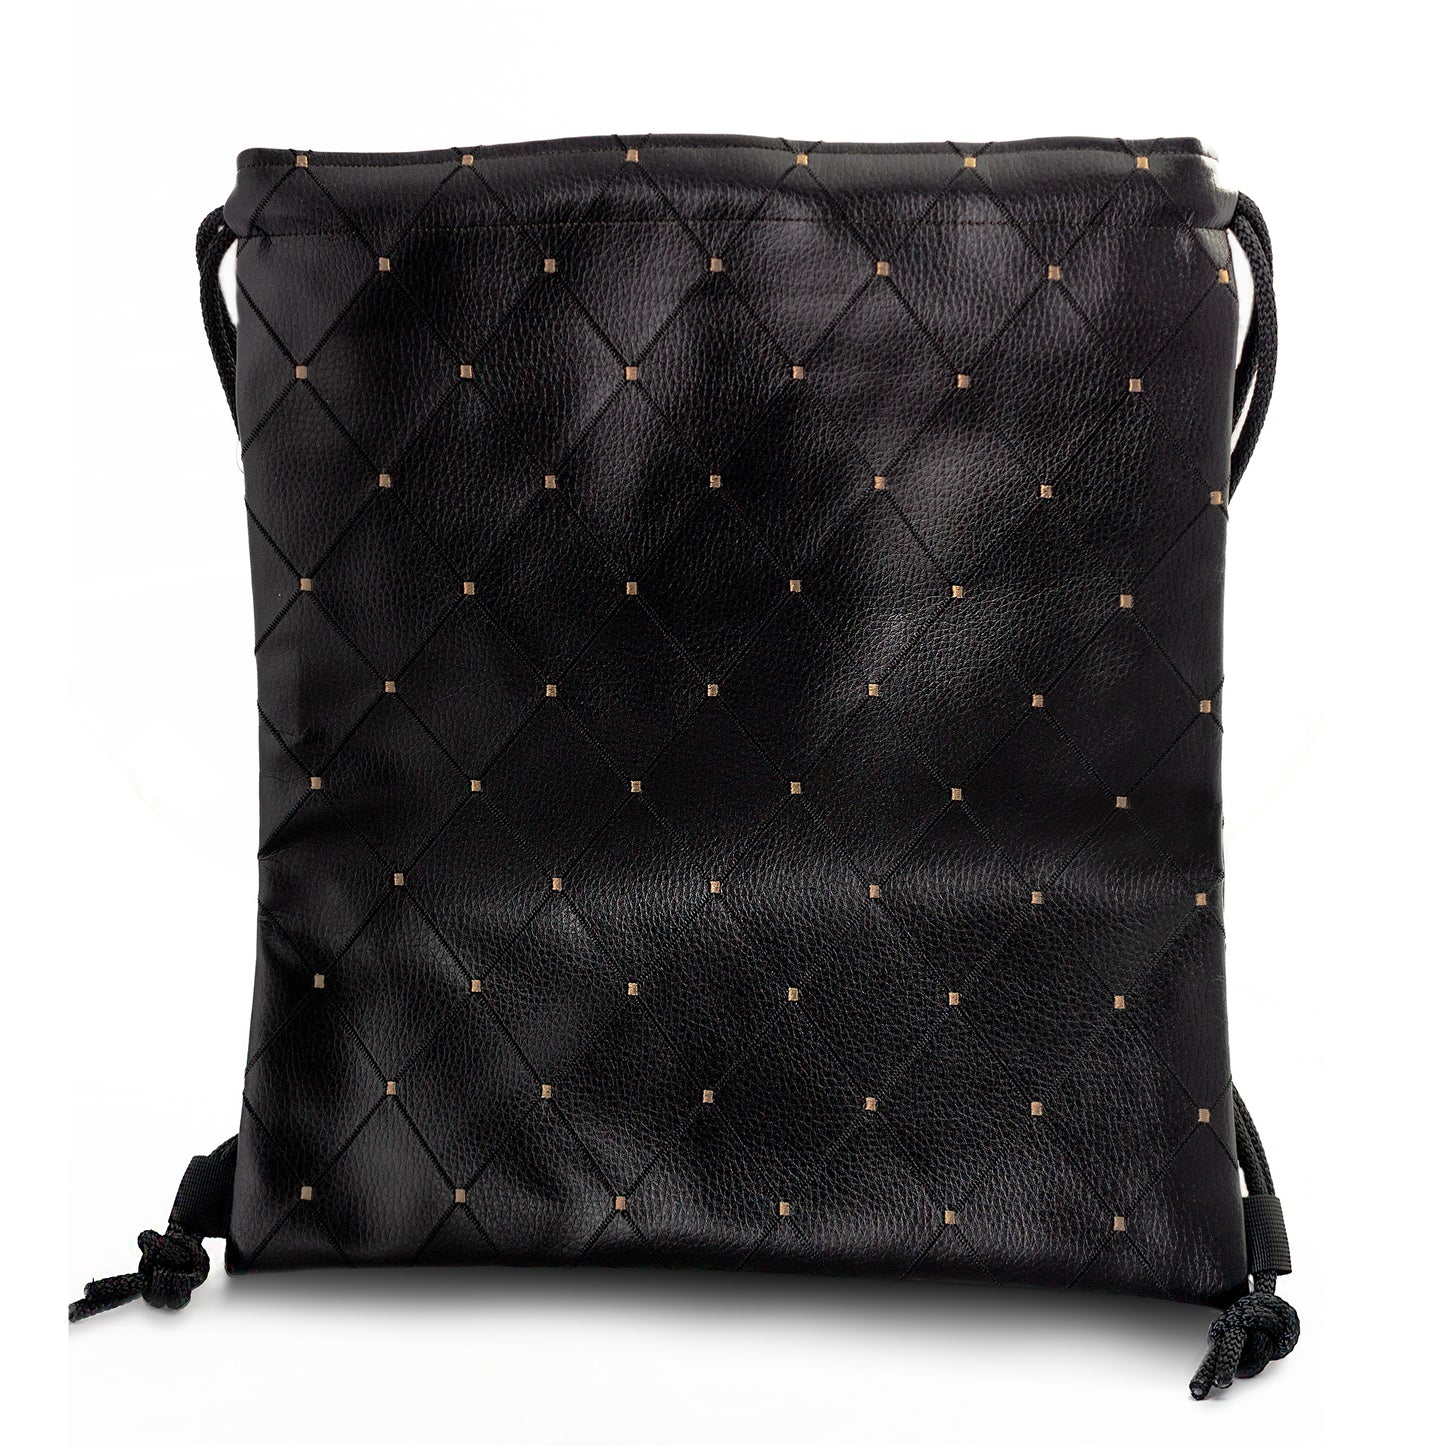 Vegan Quilted Leather Black & Gold Drawstring Backpack - Niclordesigns 